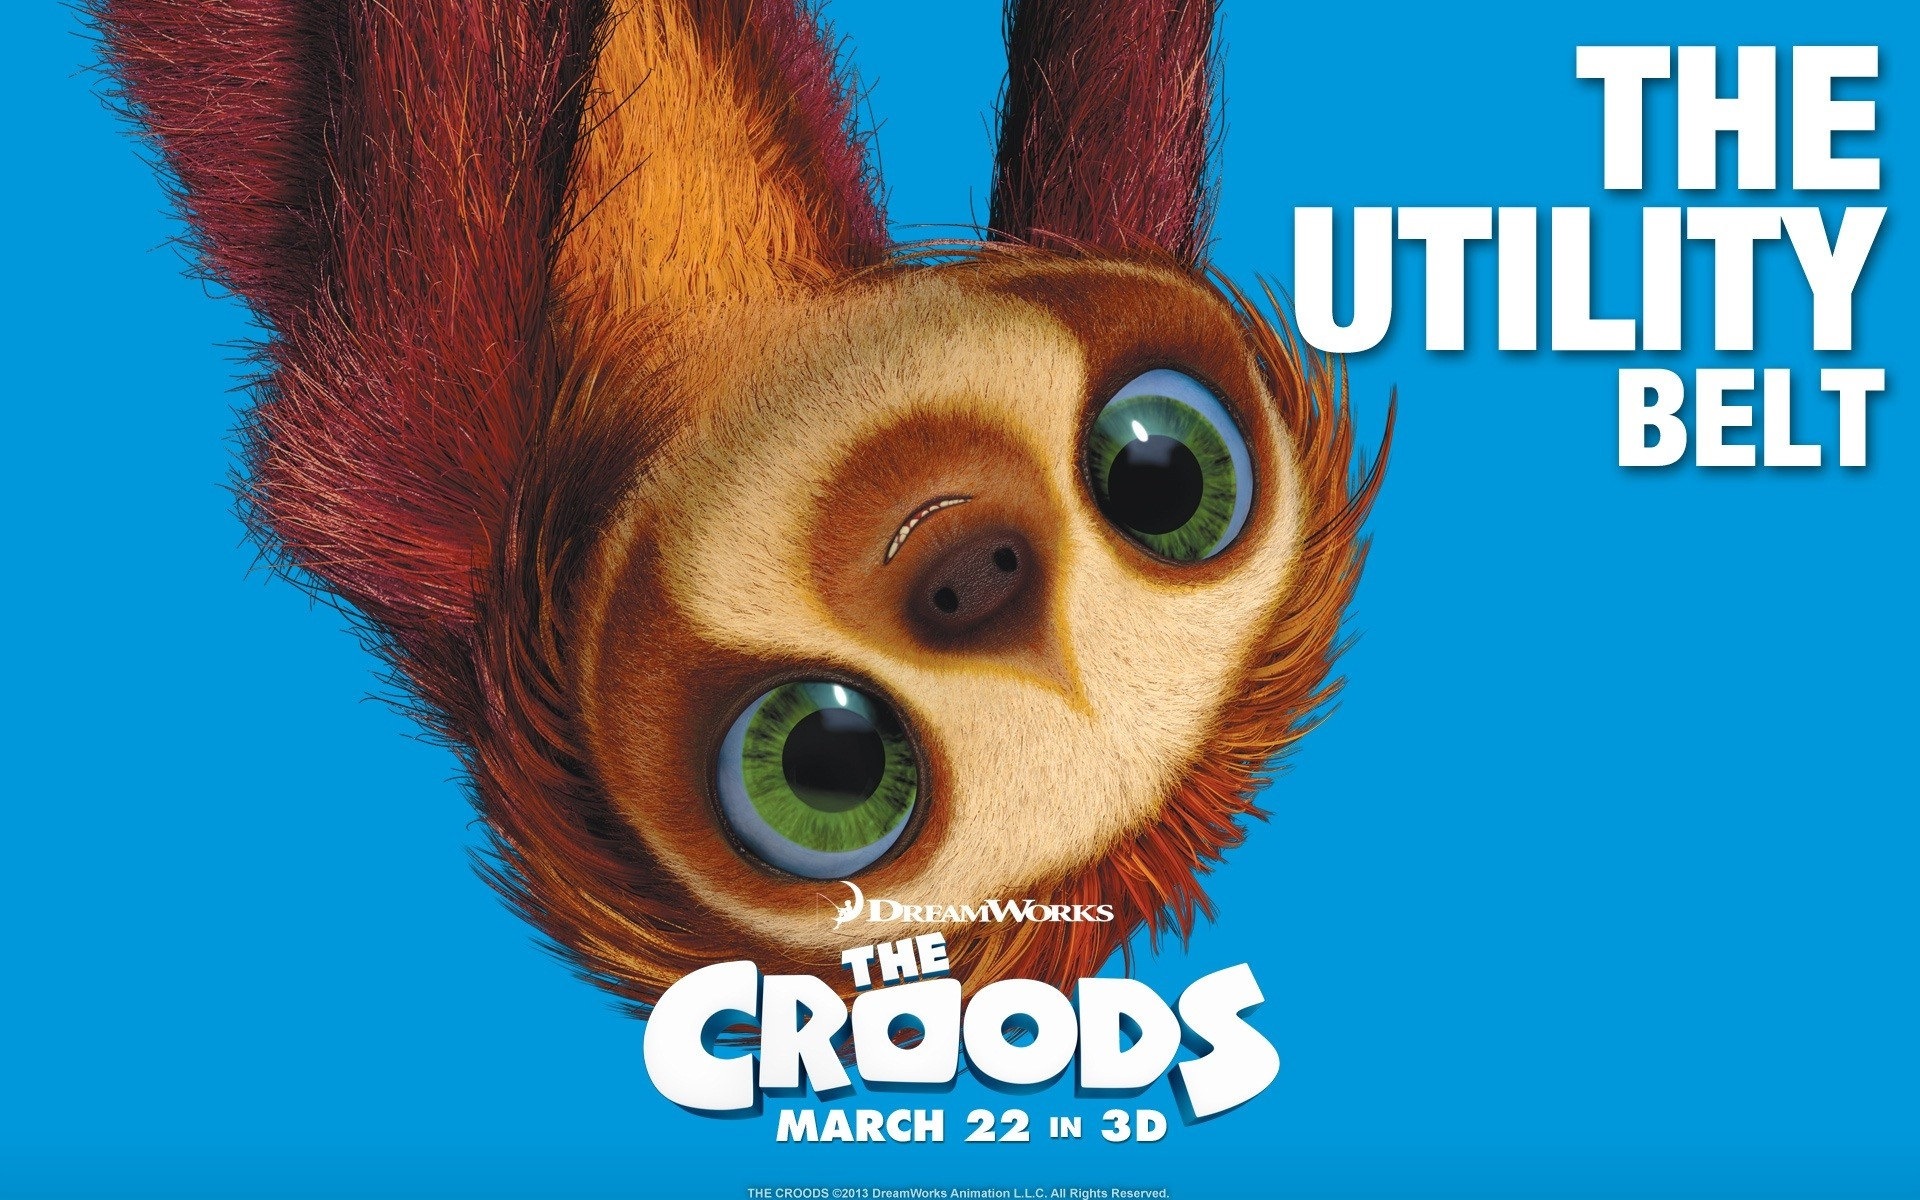 The Croods HD movie wallpapers #14 - 1920x1200